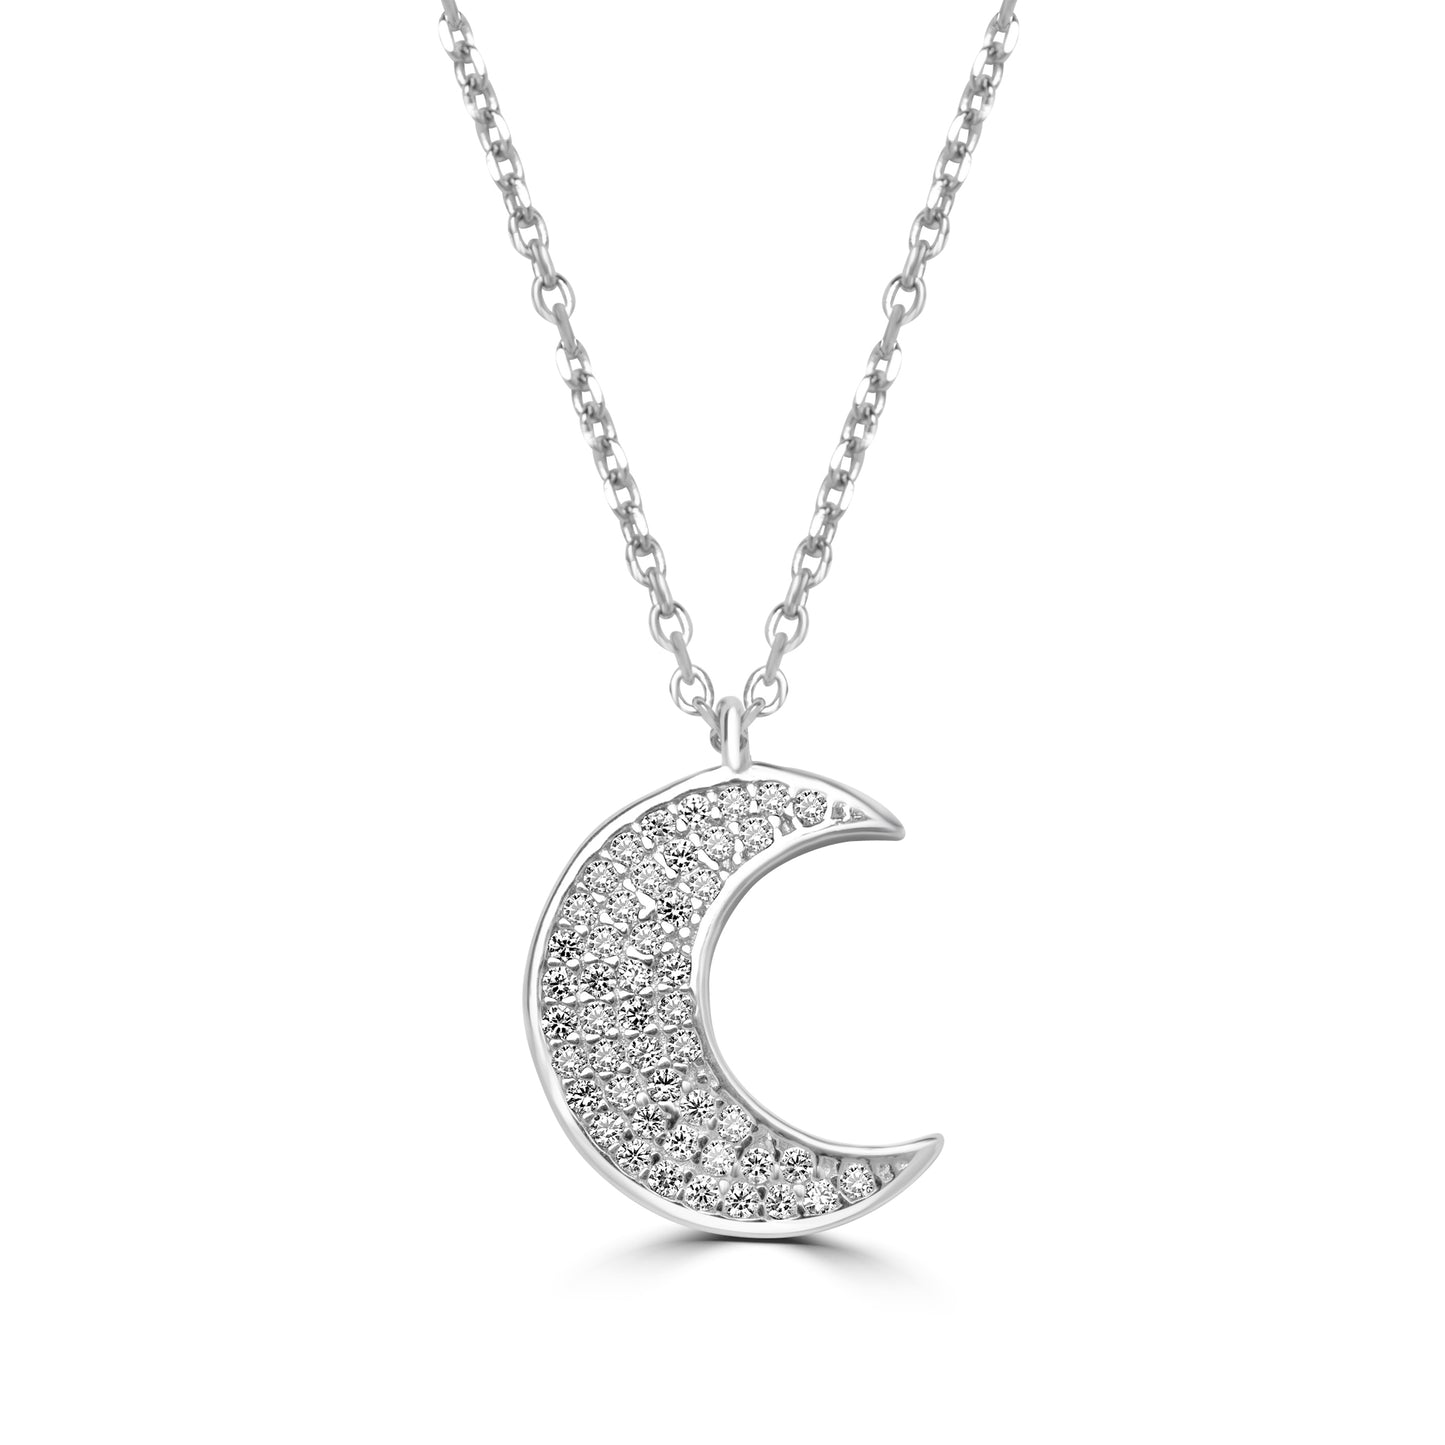 Silver Moon Shaped Charms